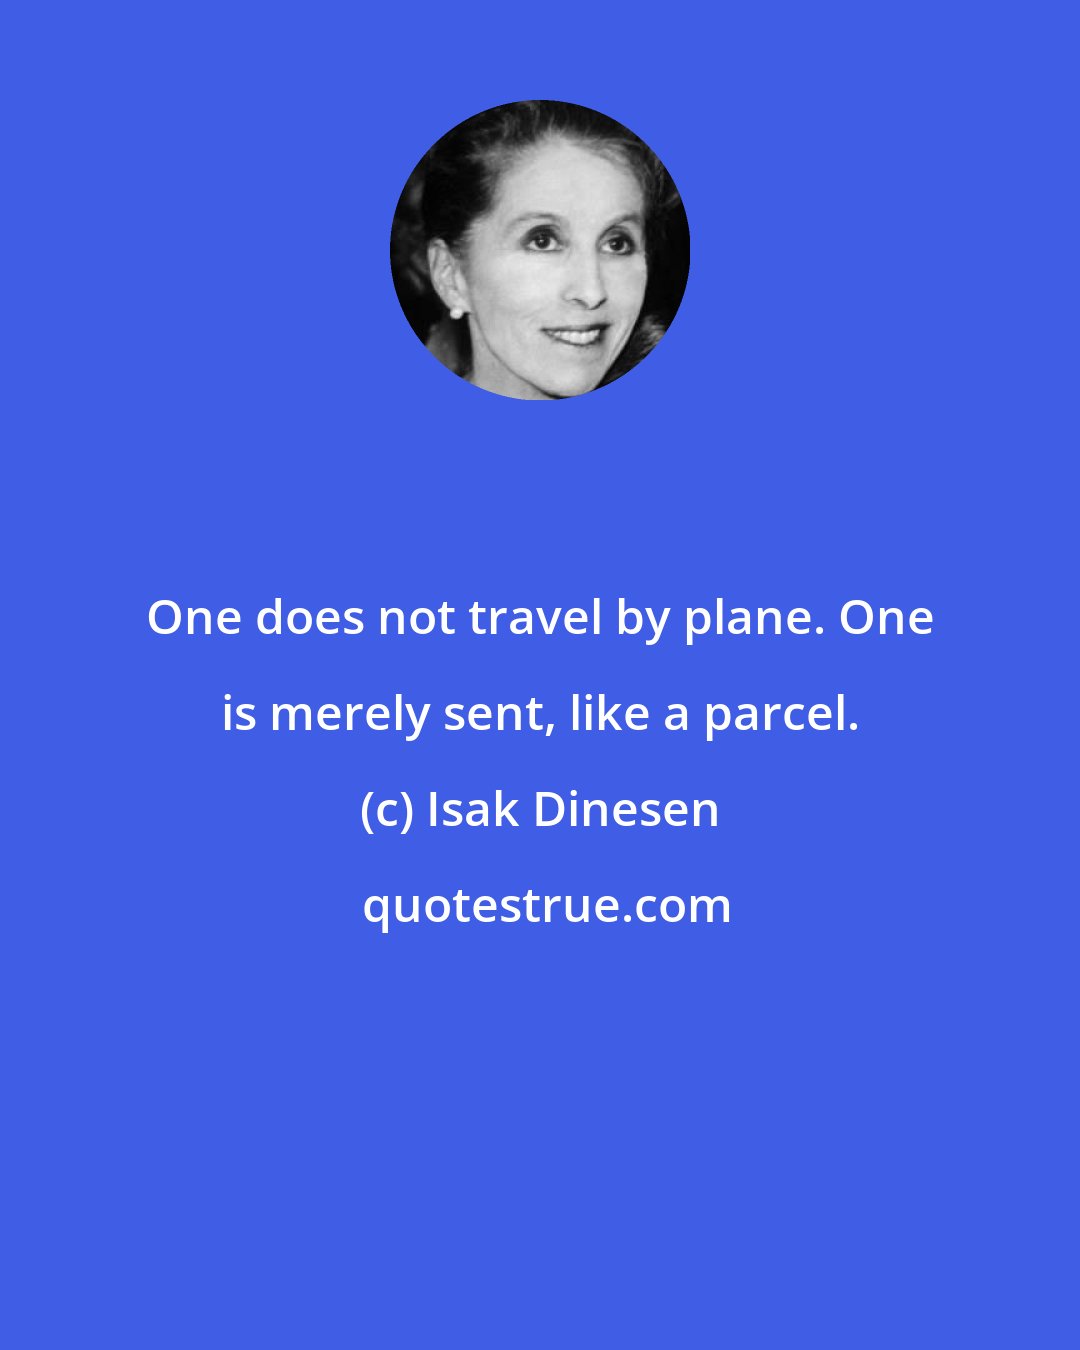 Isak Dinesen: One does not travel by plane. One is merely sent, like a parcel.